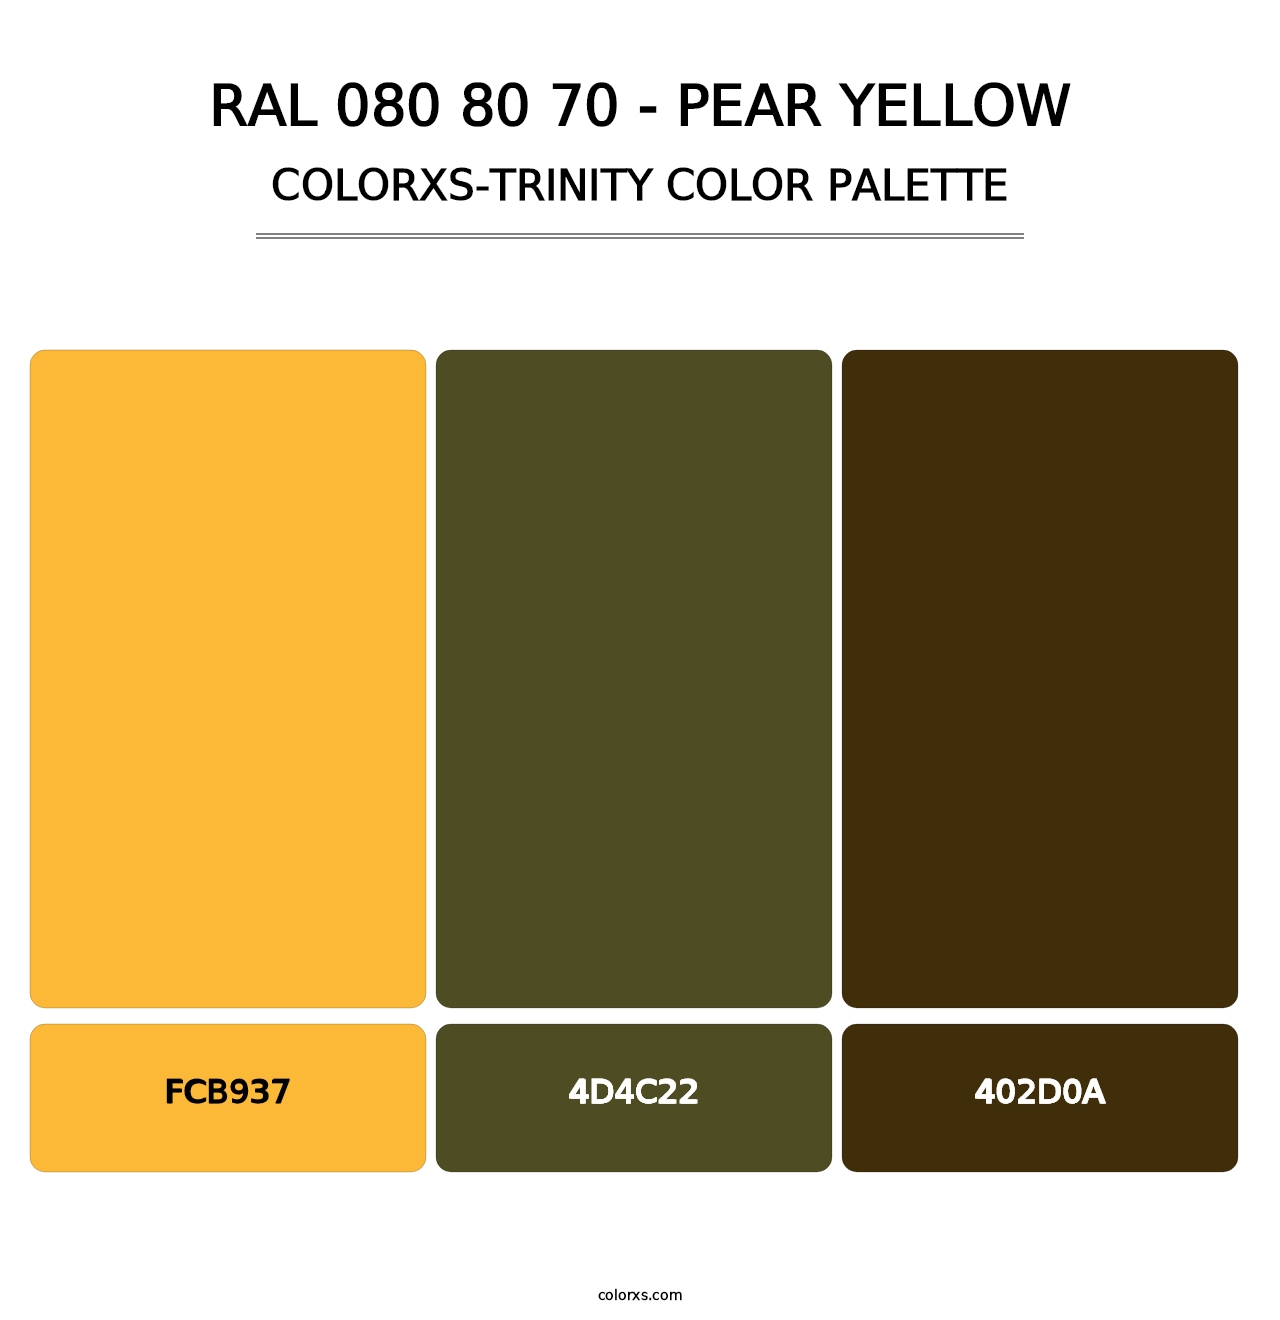 RAL 080 80 70 - Pear Yellow - Colorxs Trinity Palette